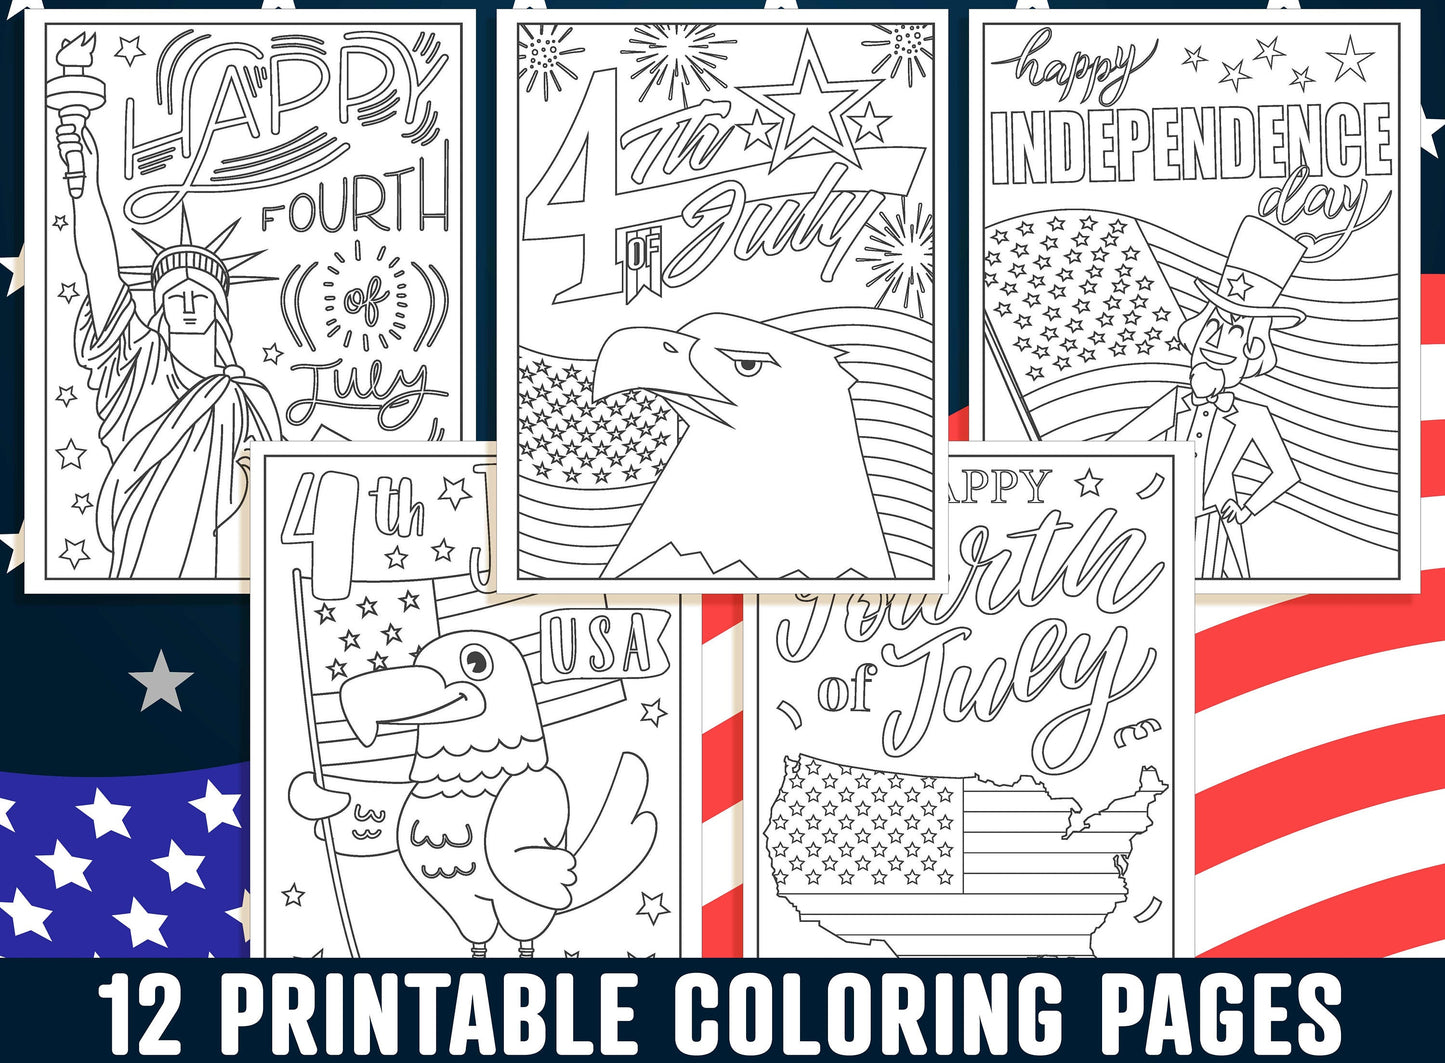 Fourth of July Coloring Pages, 4th of July Coloring Book for Kids, Boys, Girls, Teens, Adults, Independence Day/Printable Activity Sheets